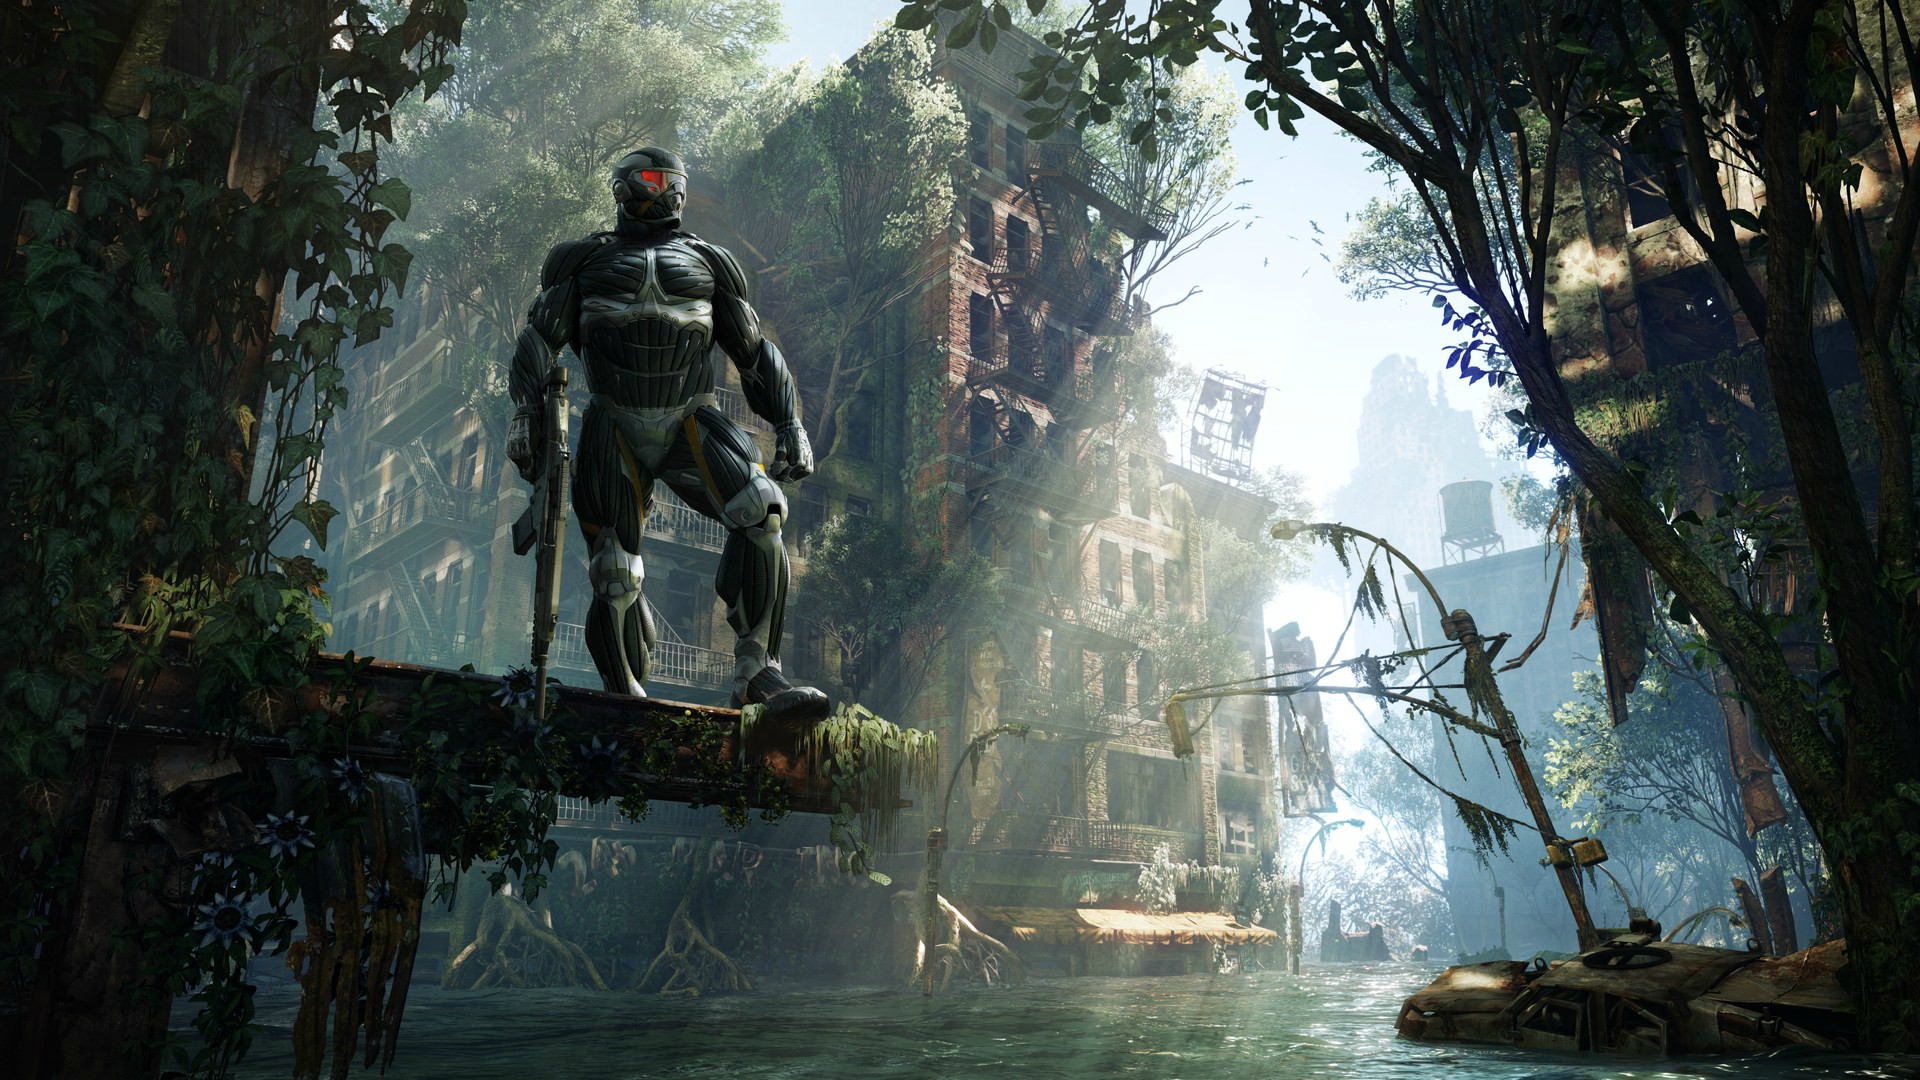 A new Crysis game is seemingly on the way